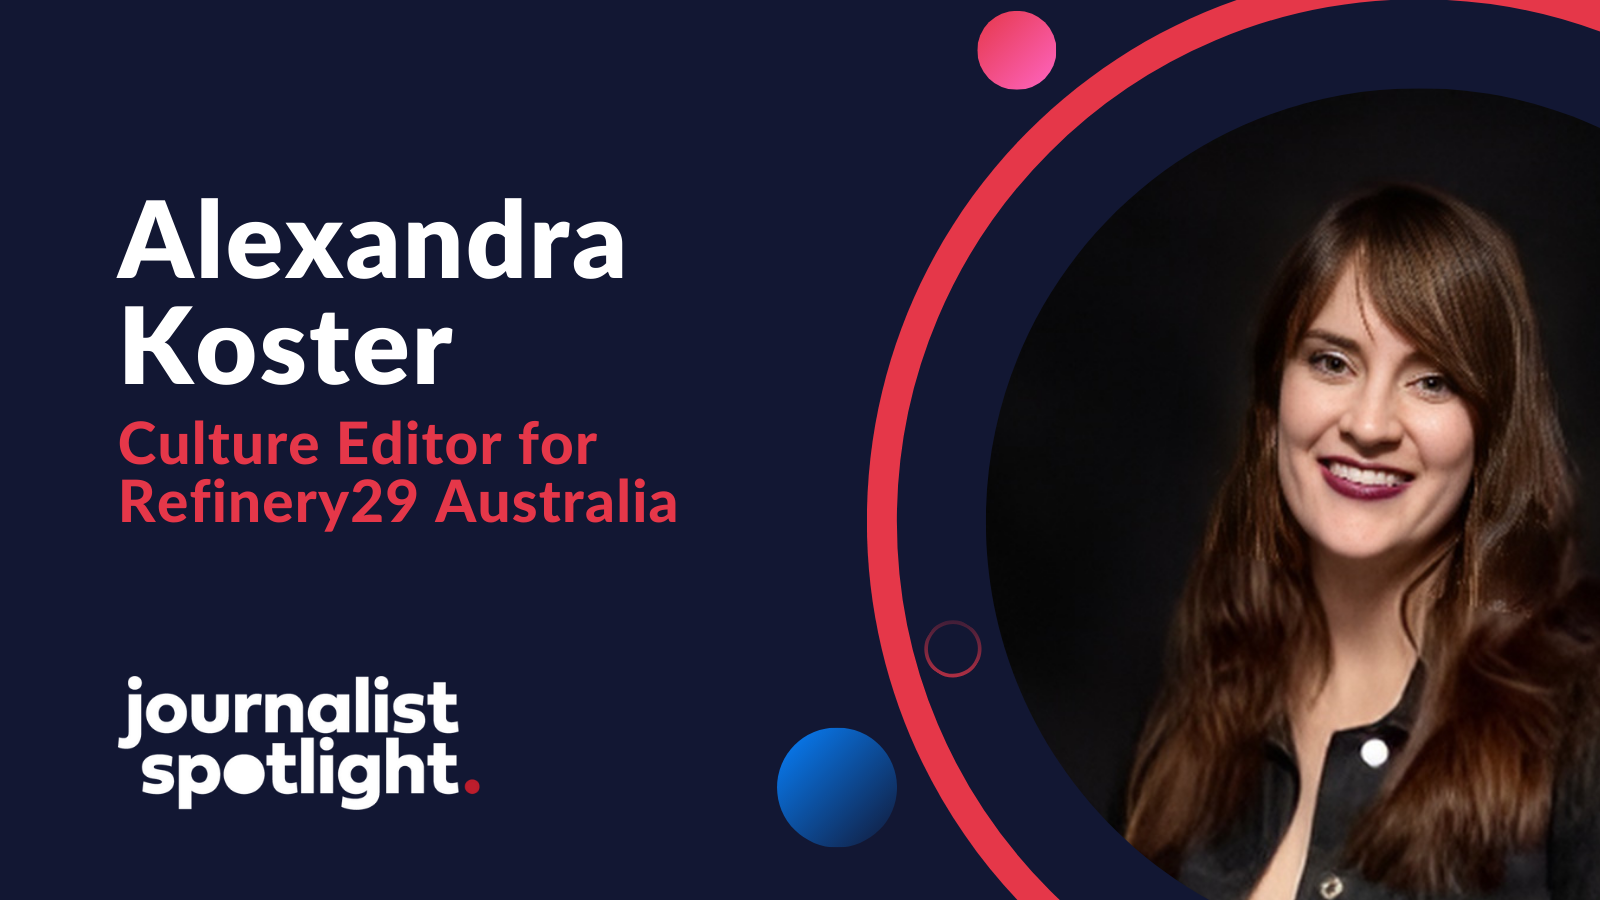 Journalist Spotlight | Interview with Alexandra Koster, Culture Editor for Refinery29 Australia